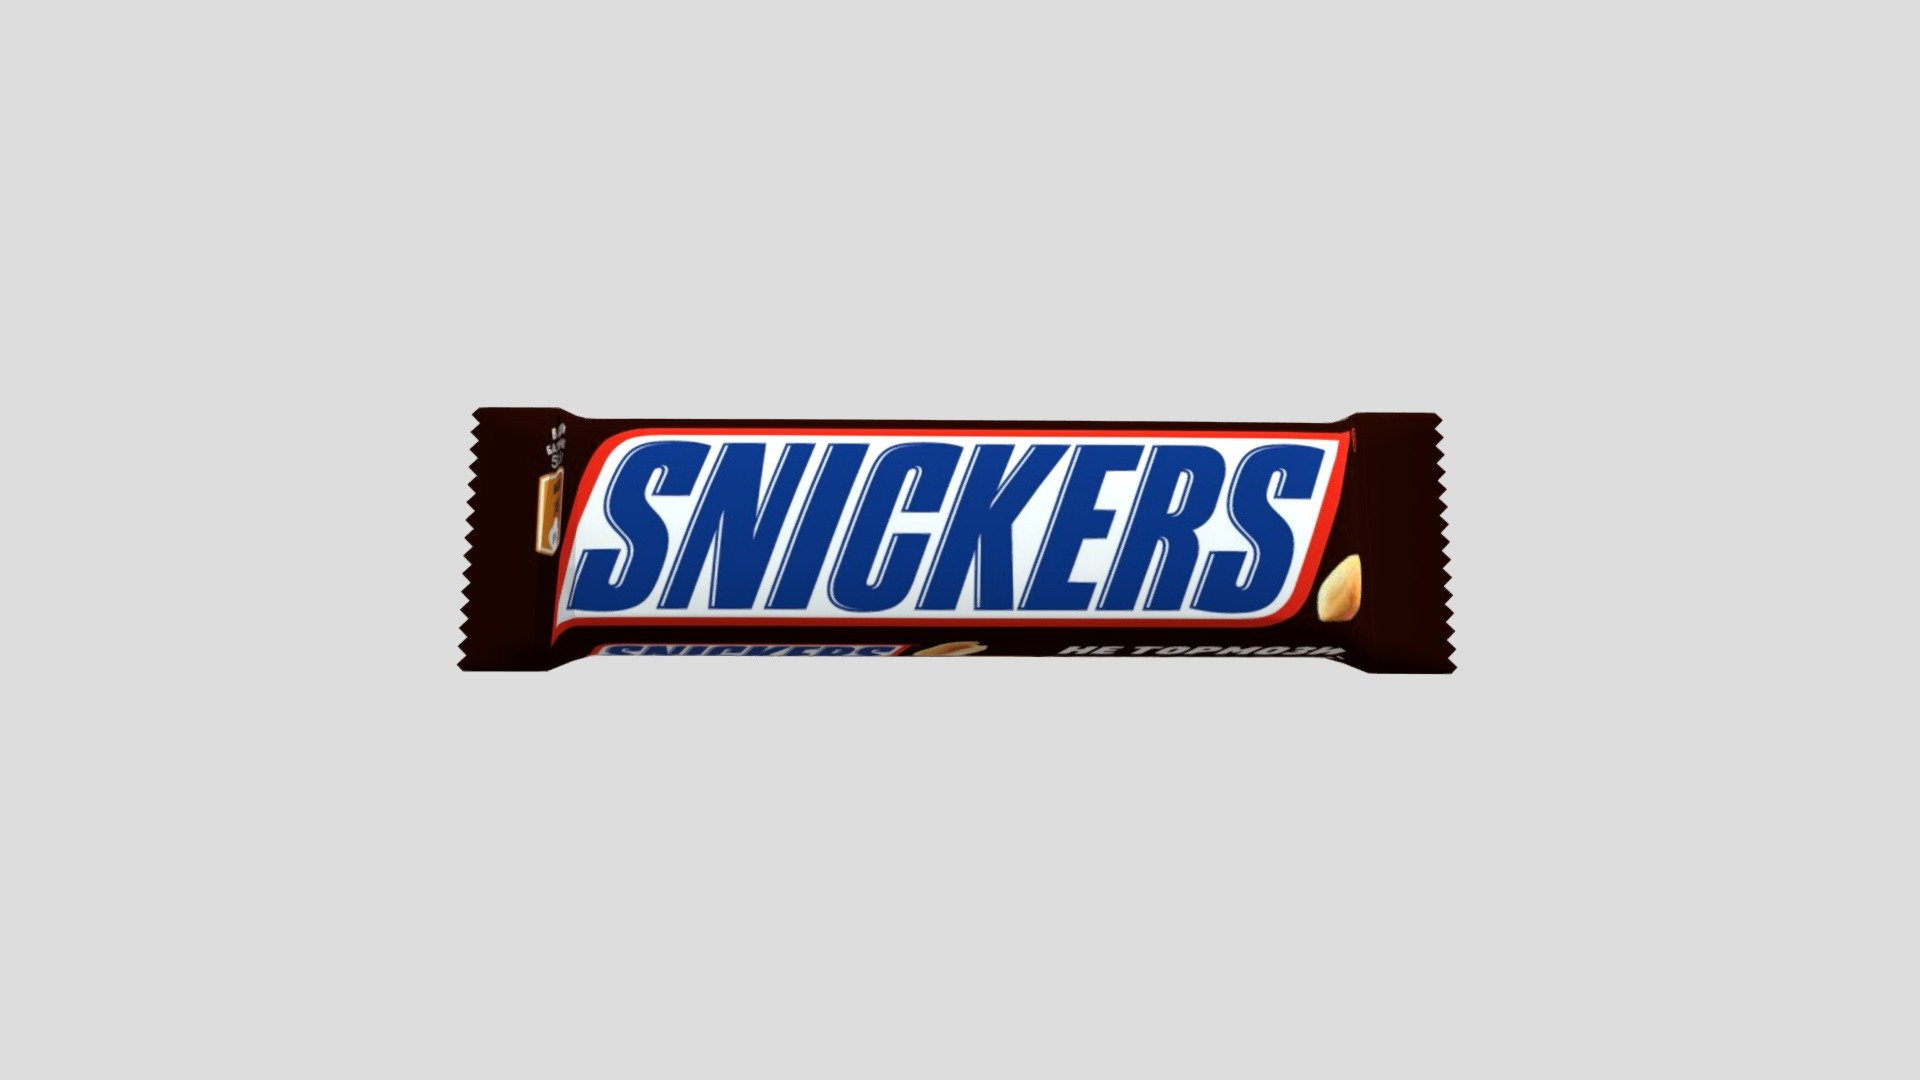 Snickers - 3D model by Polza (@8.in.glasses) 3d model